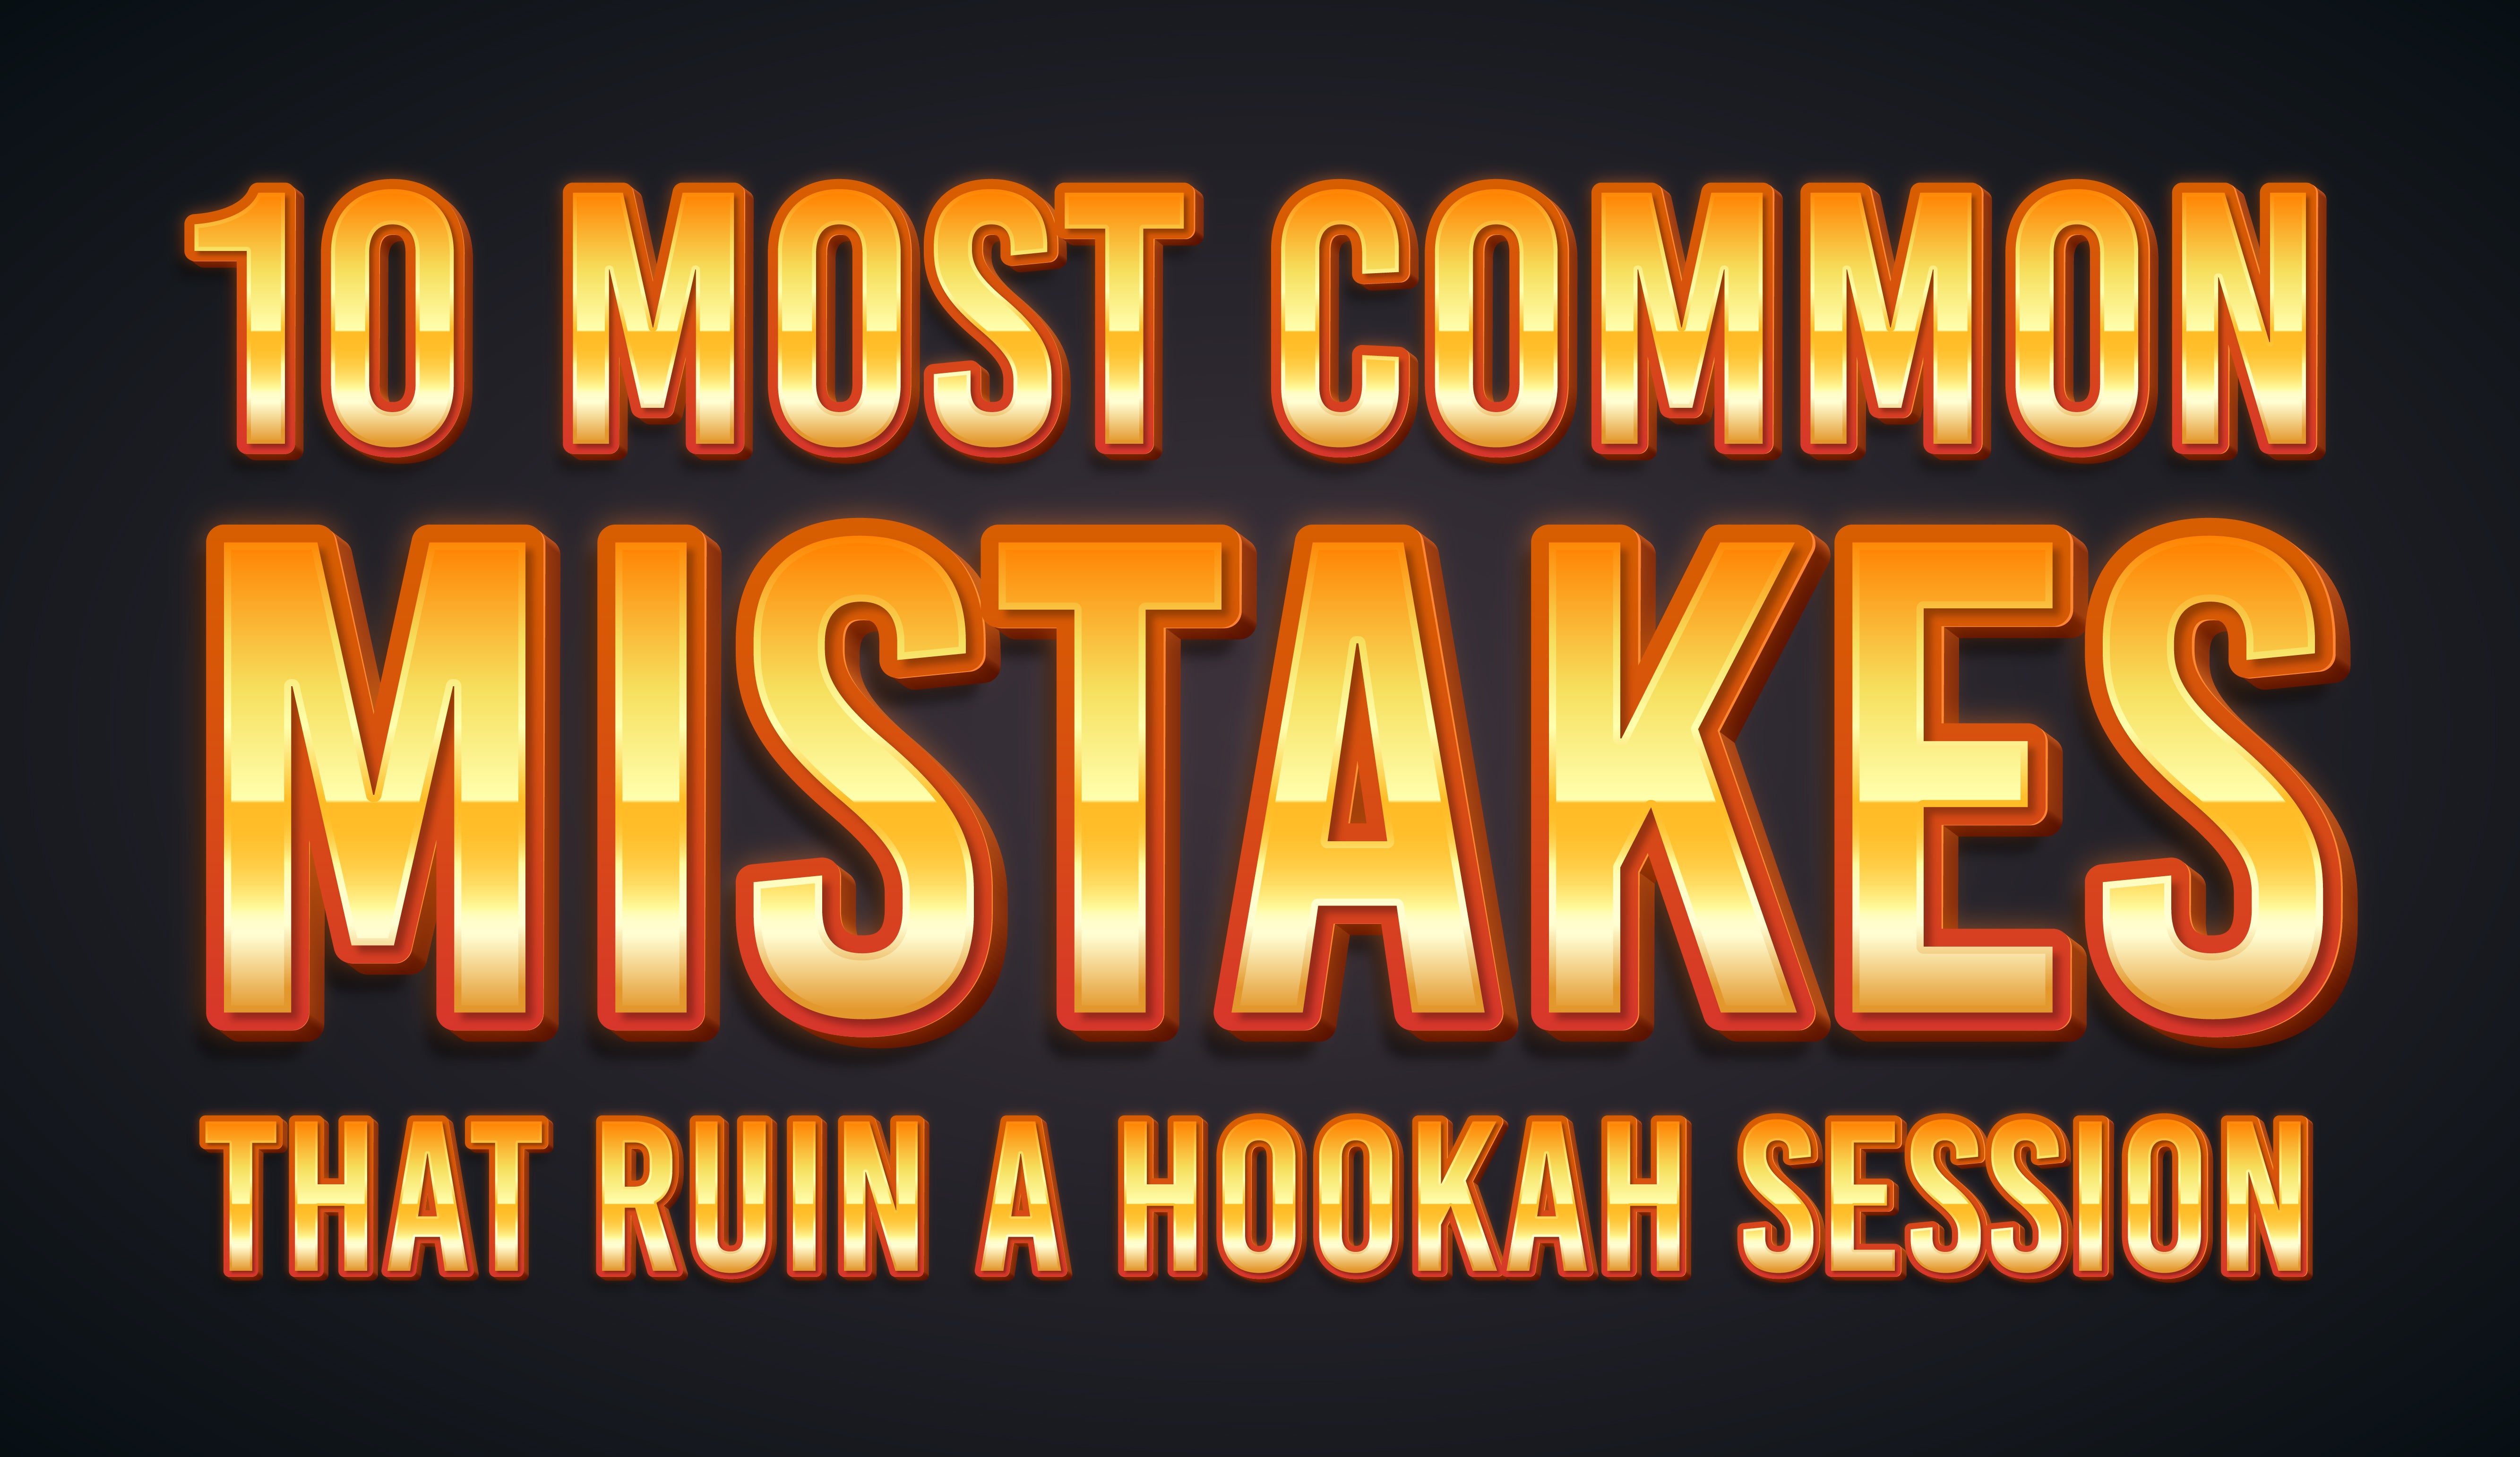 10 Most Common Mistakes that Ruin a Hookah Session